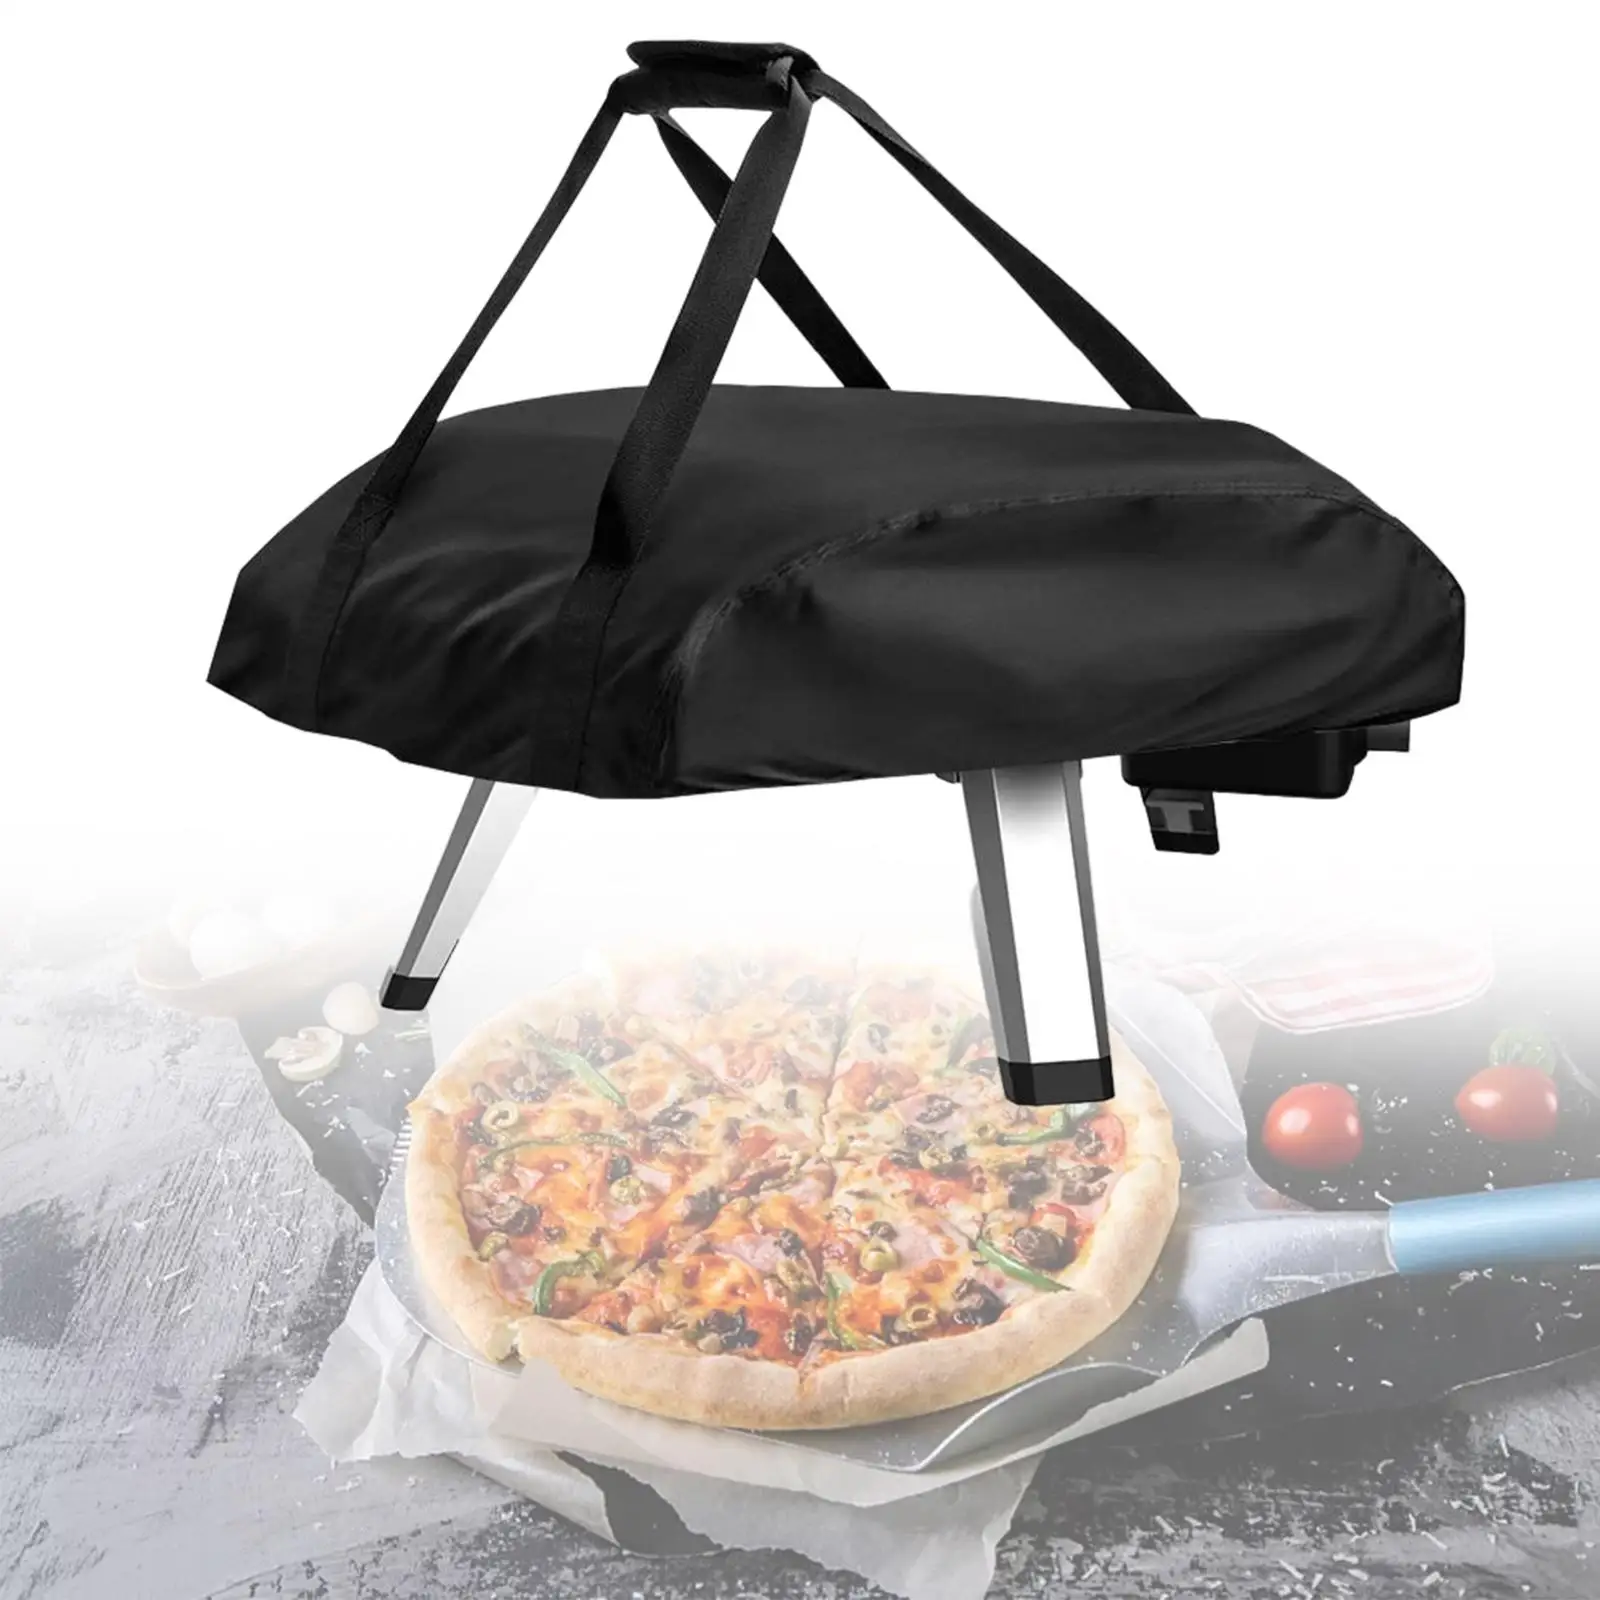 16 Camping Pizza Oven Cover with 2 Webbing Oxford Cloth Fittings Portable High Strength Dustproof for Garden Barbecue